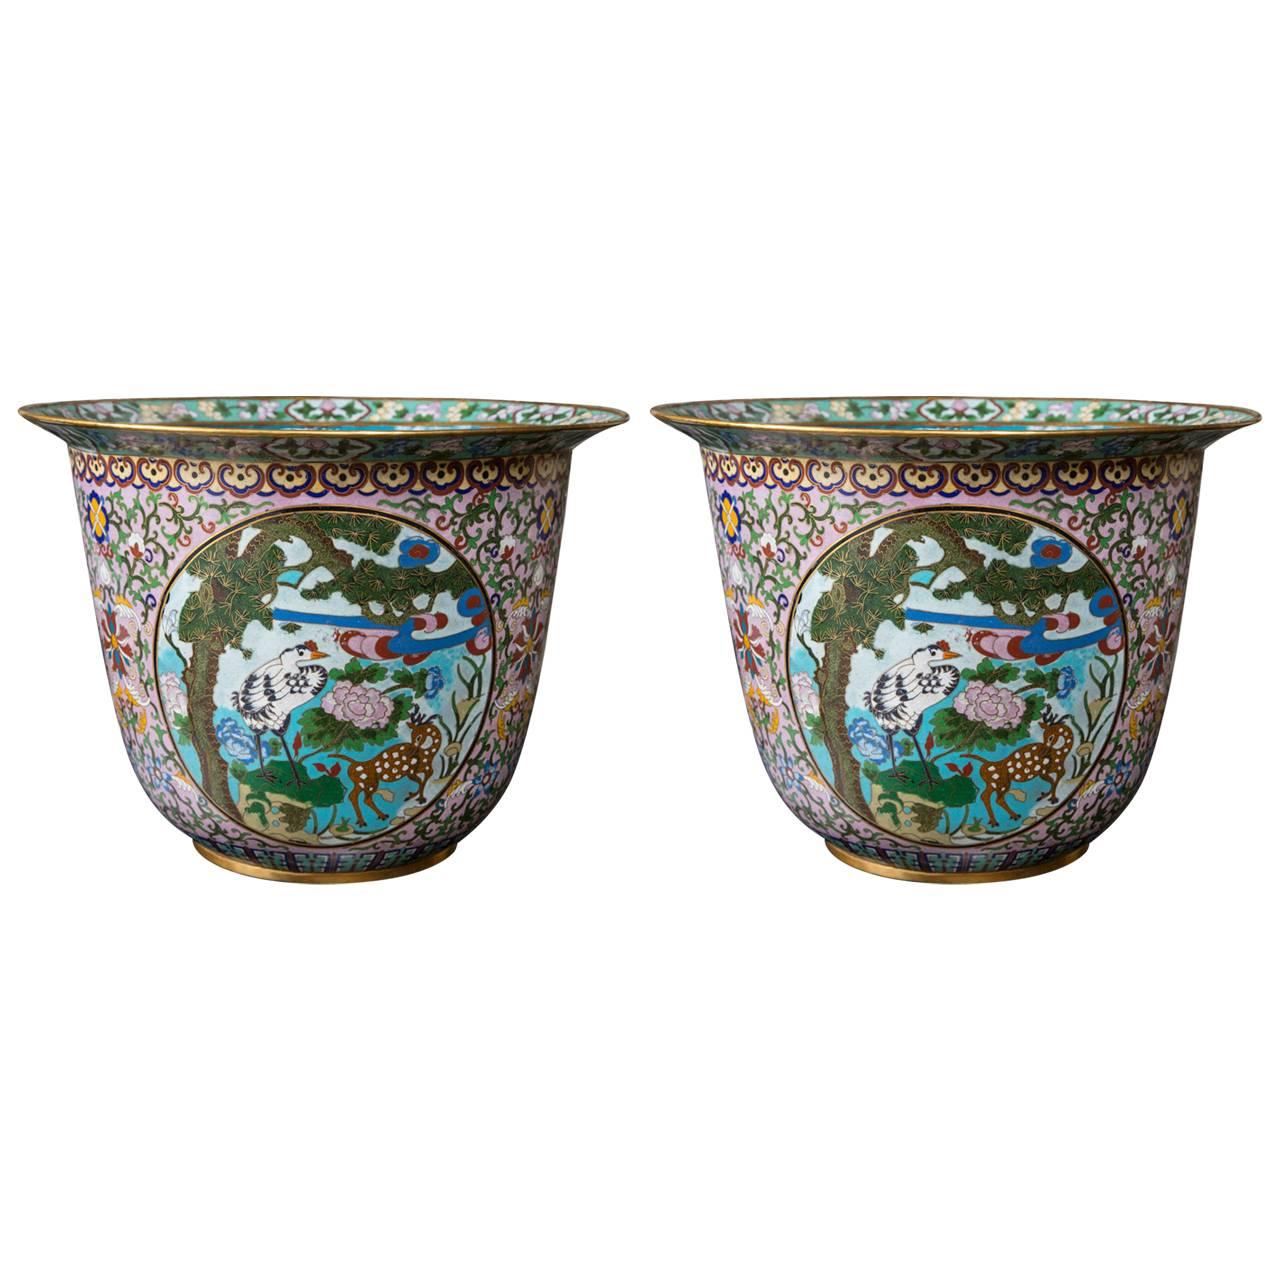 Pair of Chinese Cloisonné Planters